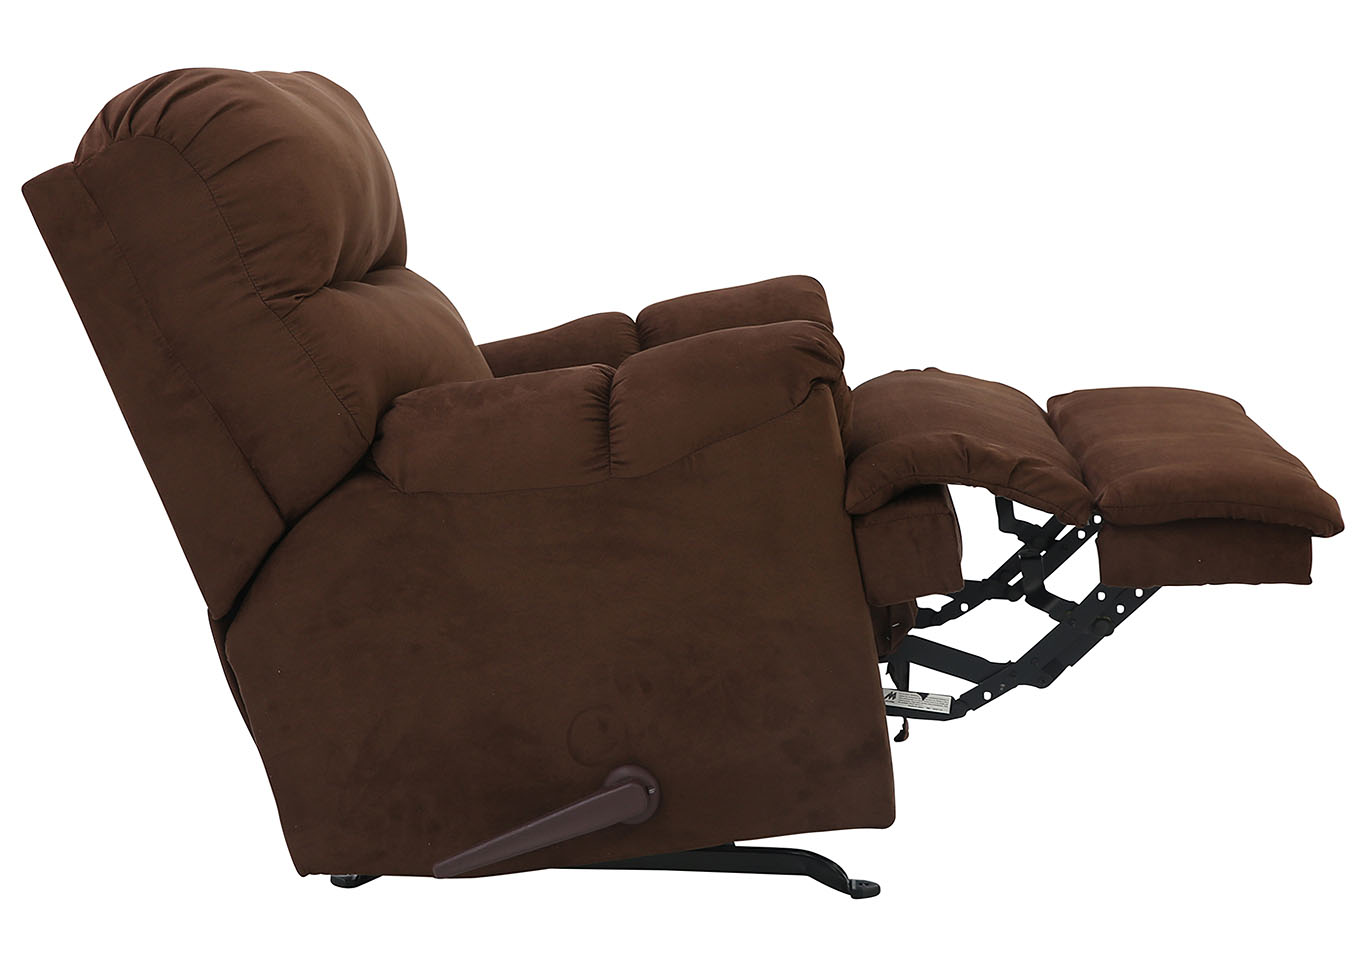 ANTHONY CHOCOLATE RECLINER,AFFORDABLE FURNITURE